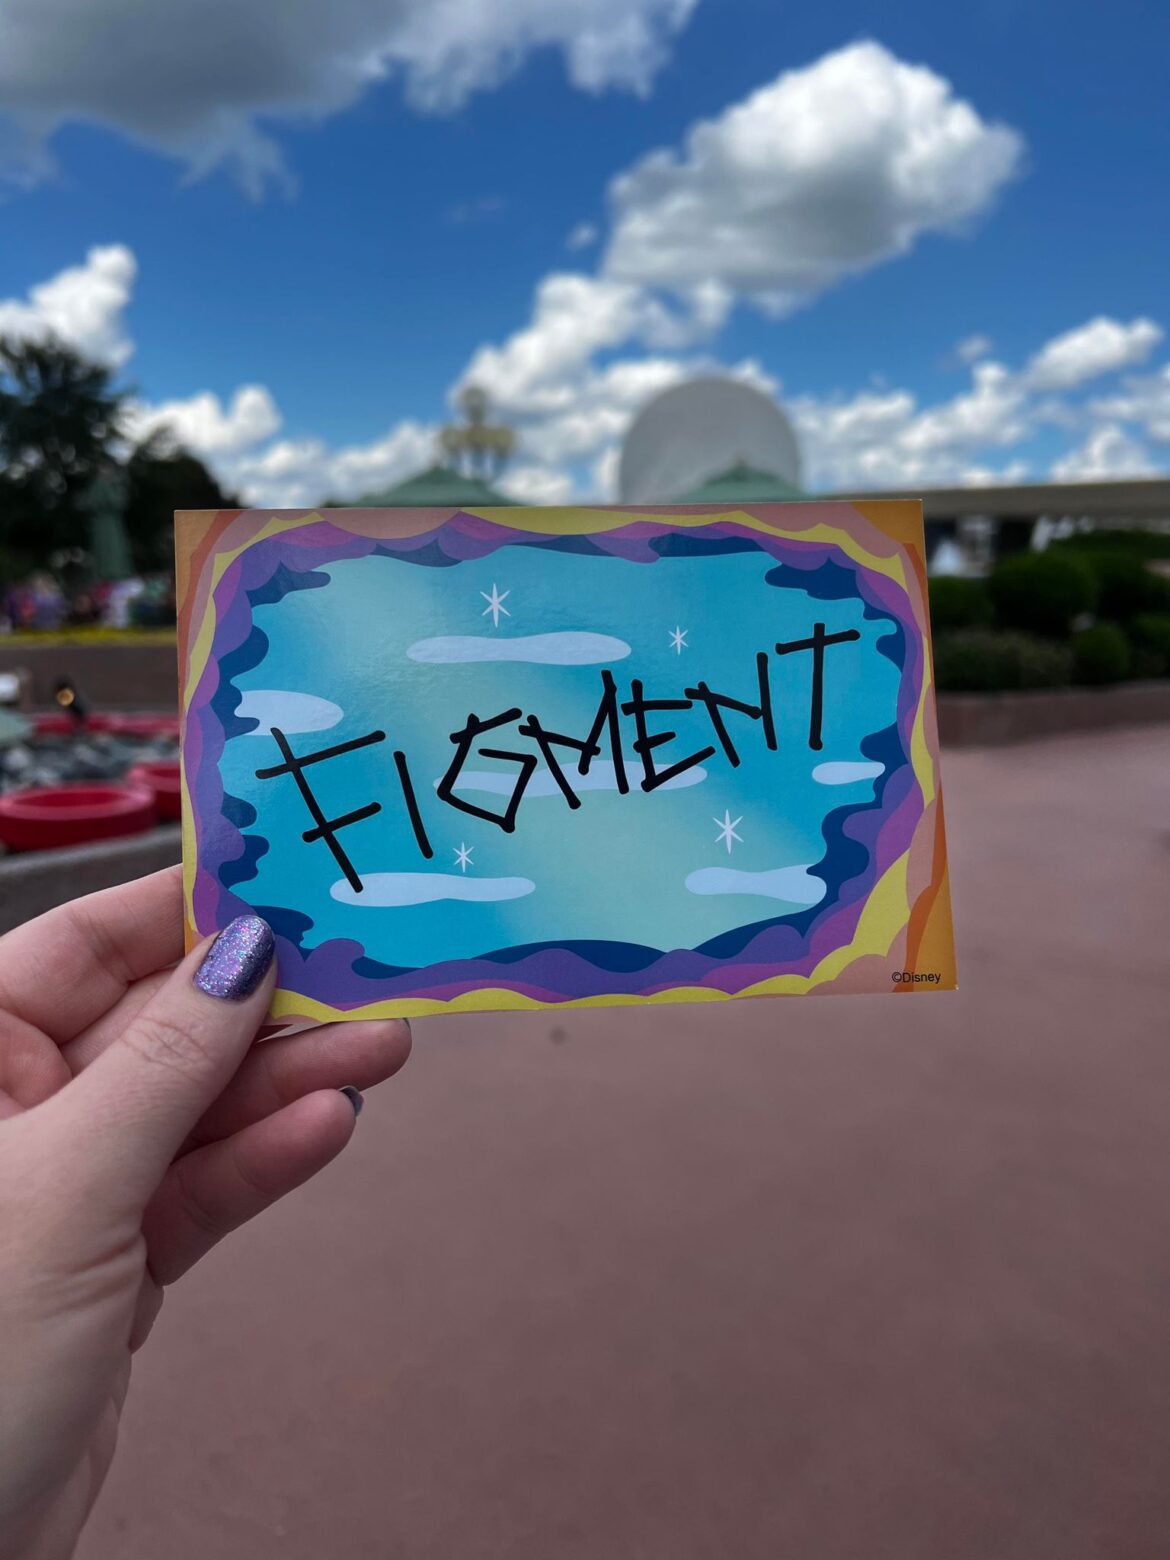 Figment Autograph Cards Being Given to Guests at New EPCOT Meet and Greet